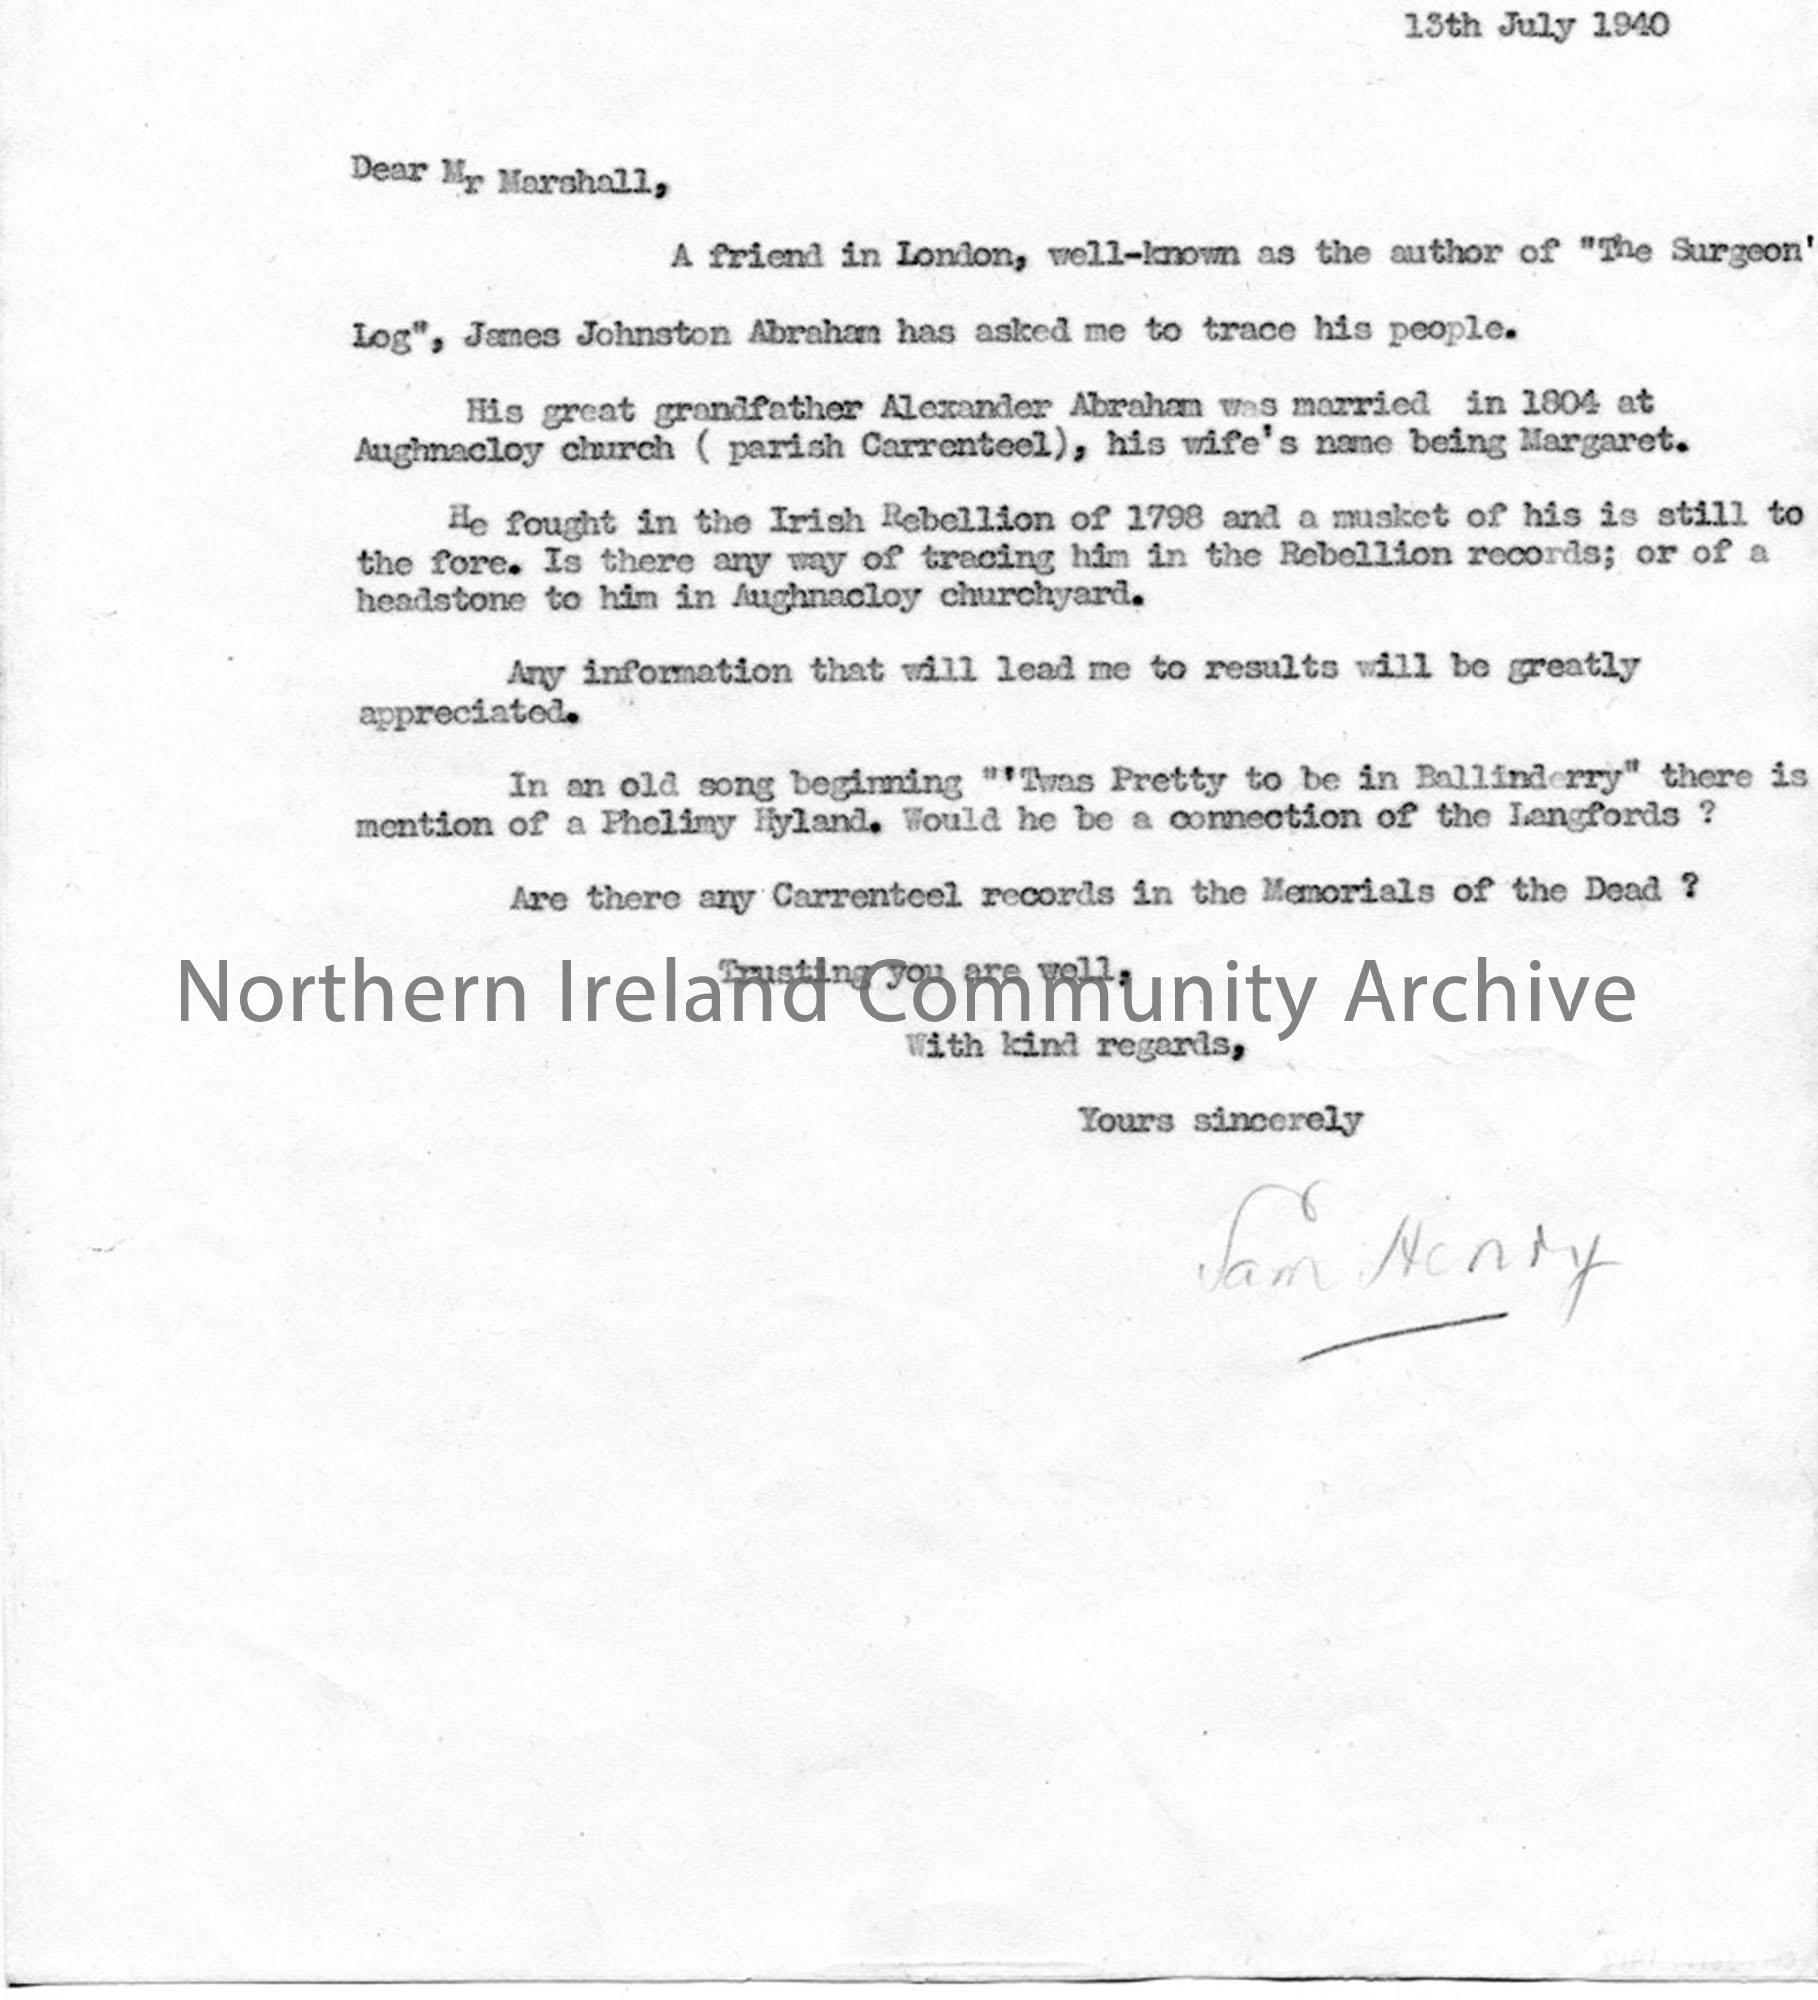 Letter to Mr Marshall 13.7.1940